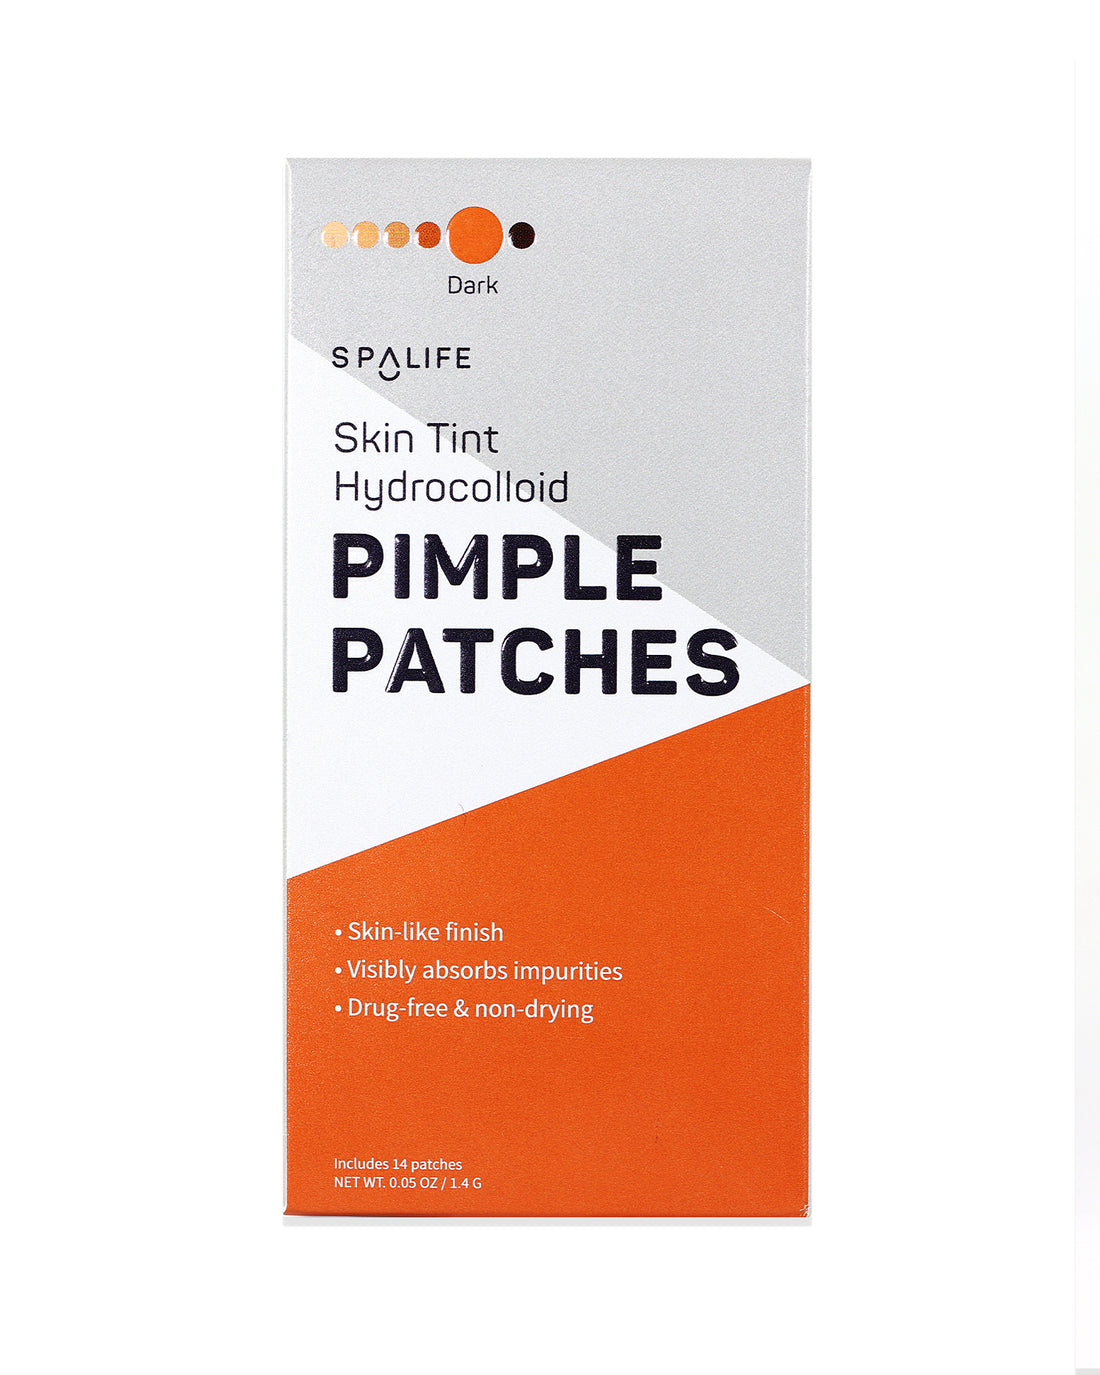 Skin_tint_pimple_patches_packe-73